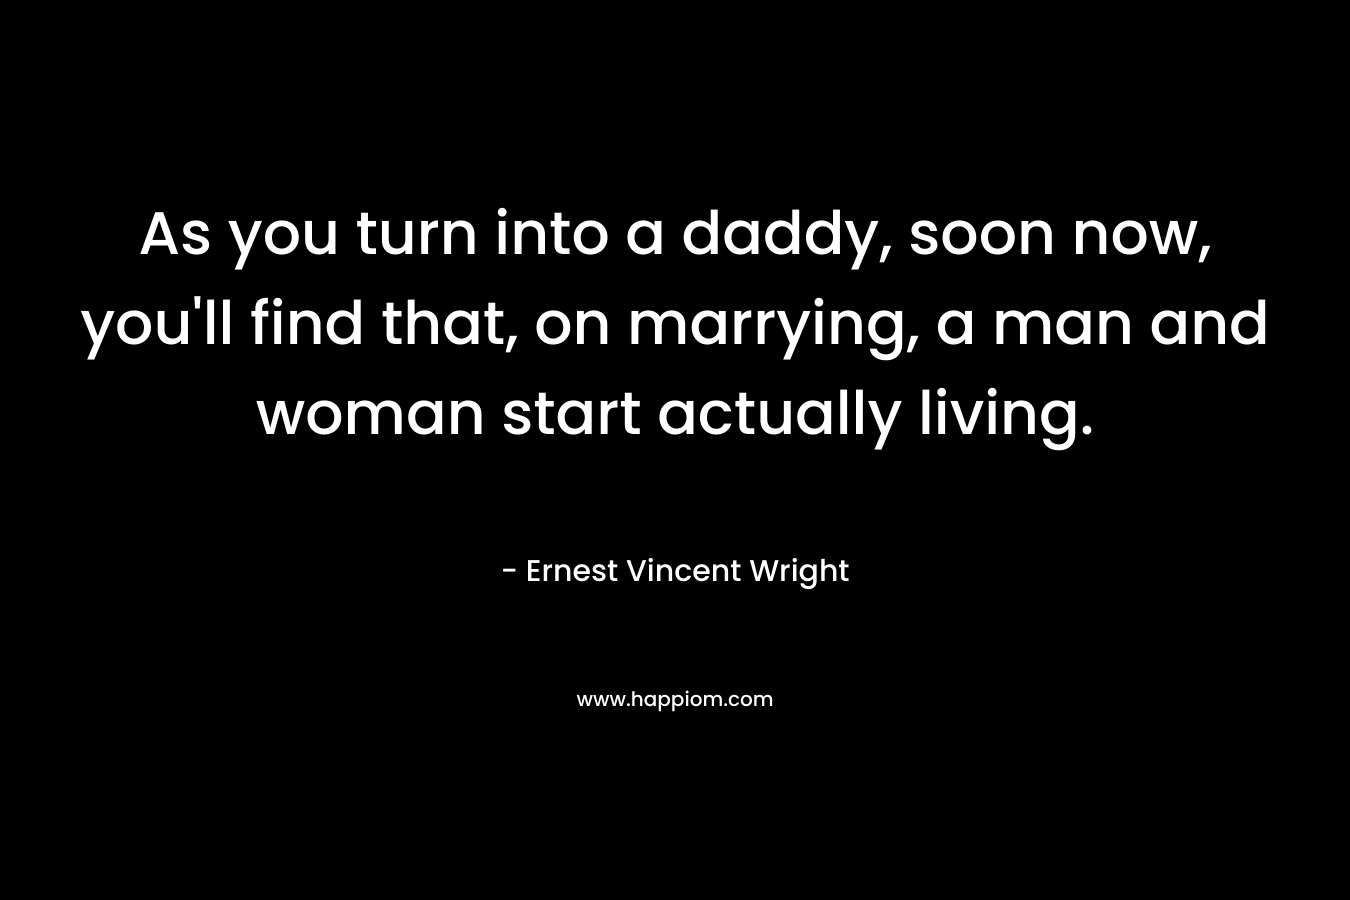 As you turn into a daddy, soon now, you’ll find that, on marrying, a man and woman start actually living. – Ernest Vincent Wright